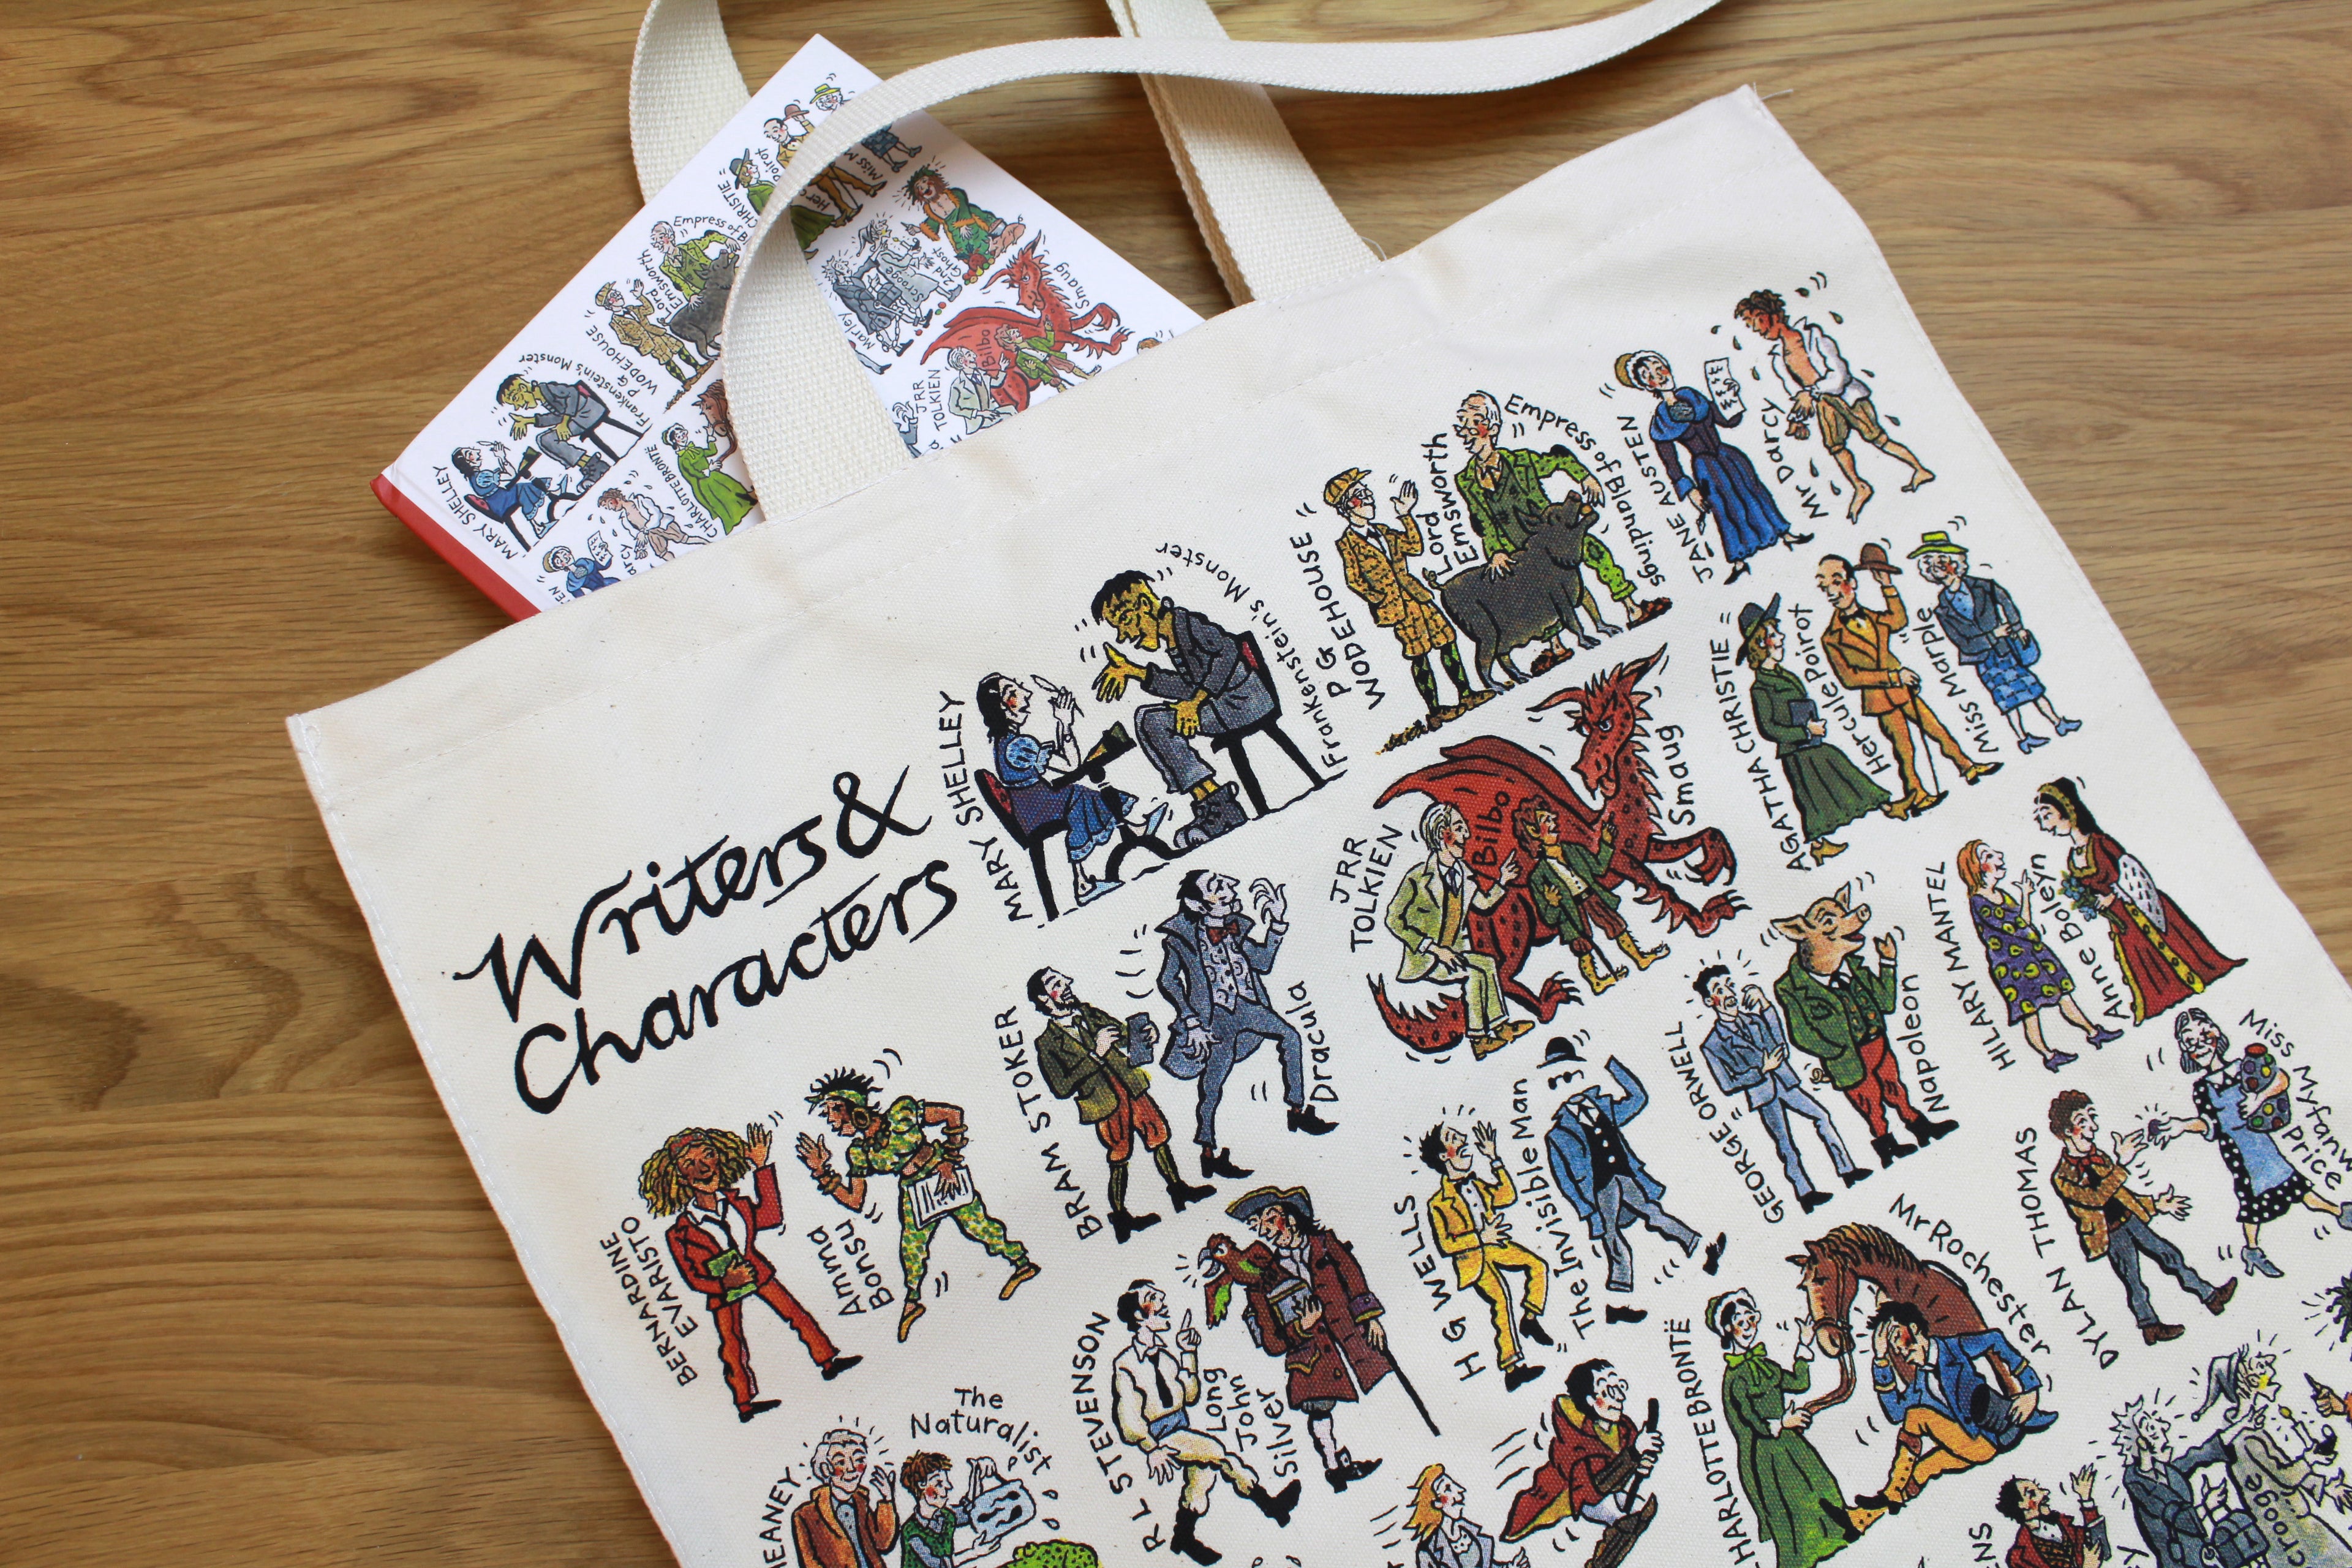 Writers &amp; Characters Tote Bag